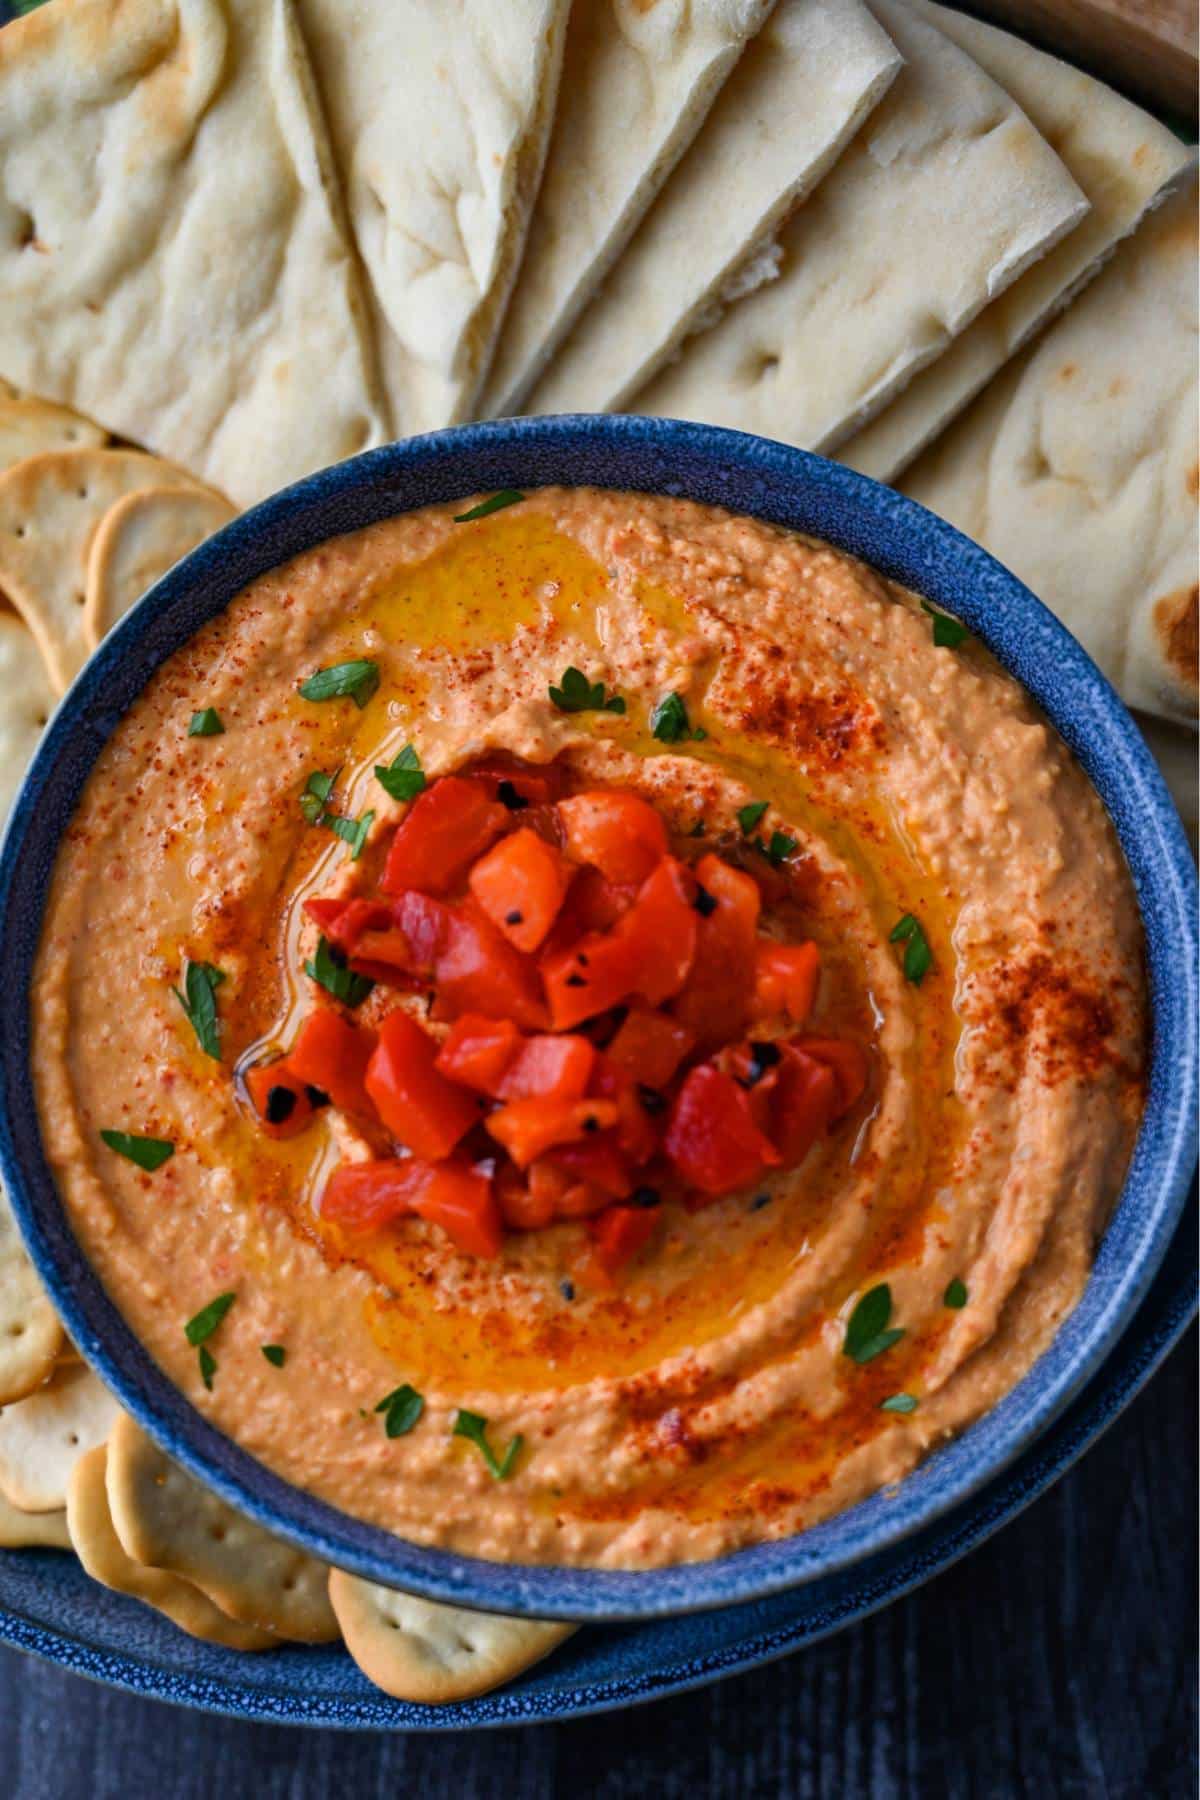 photo looking down at a bowl of fresh paprika hummus with pita slices and crackers